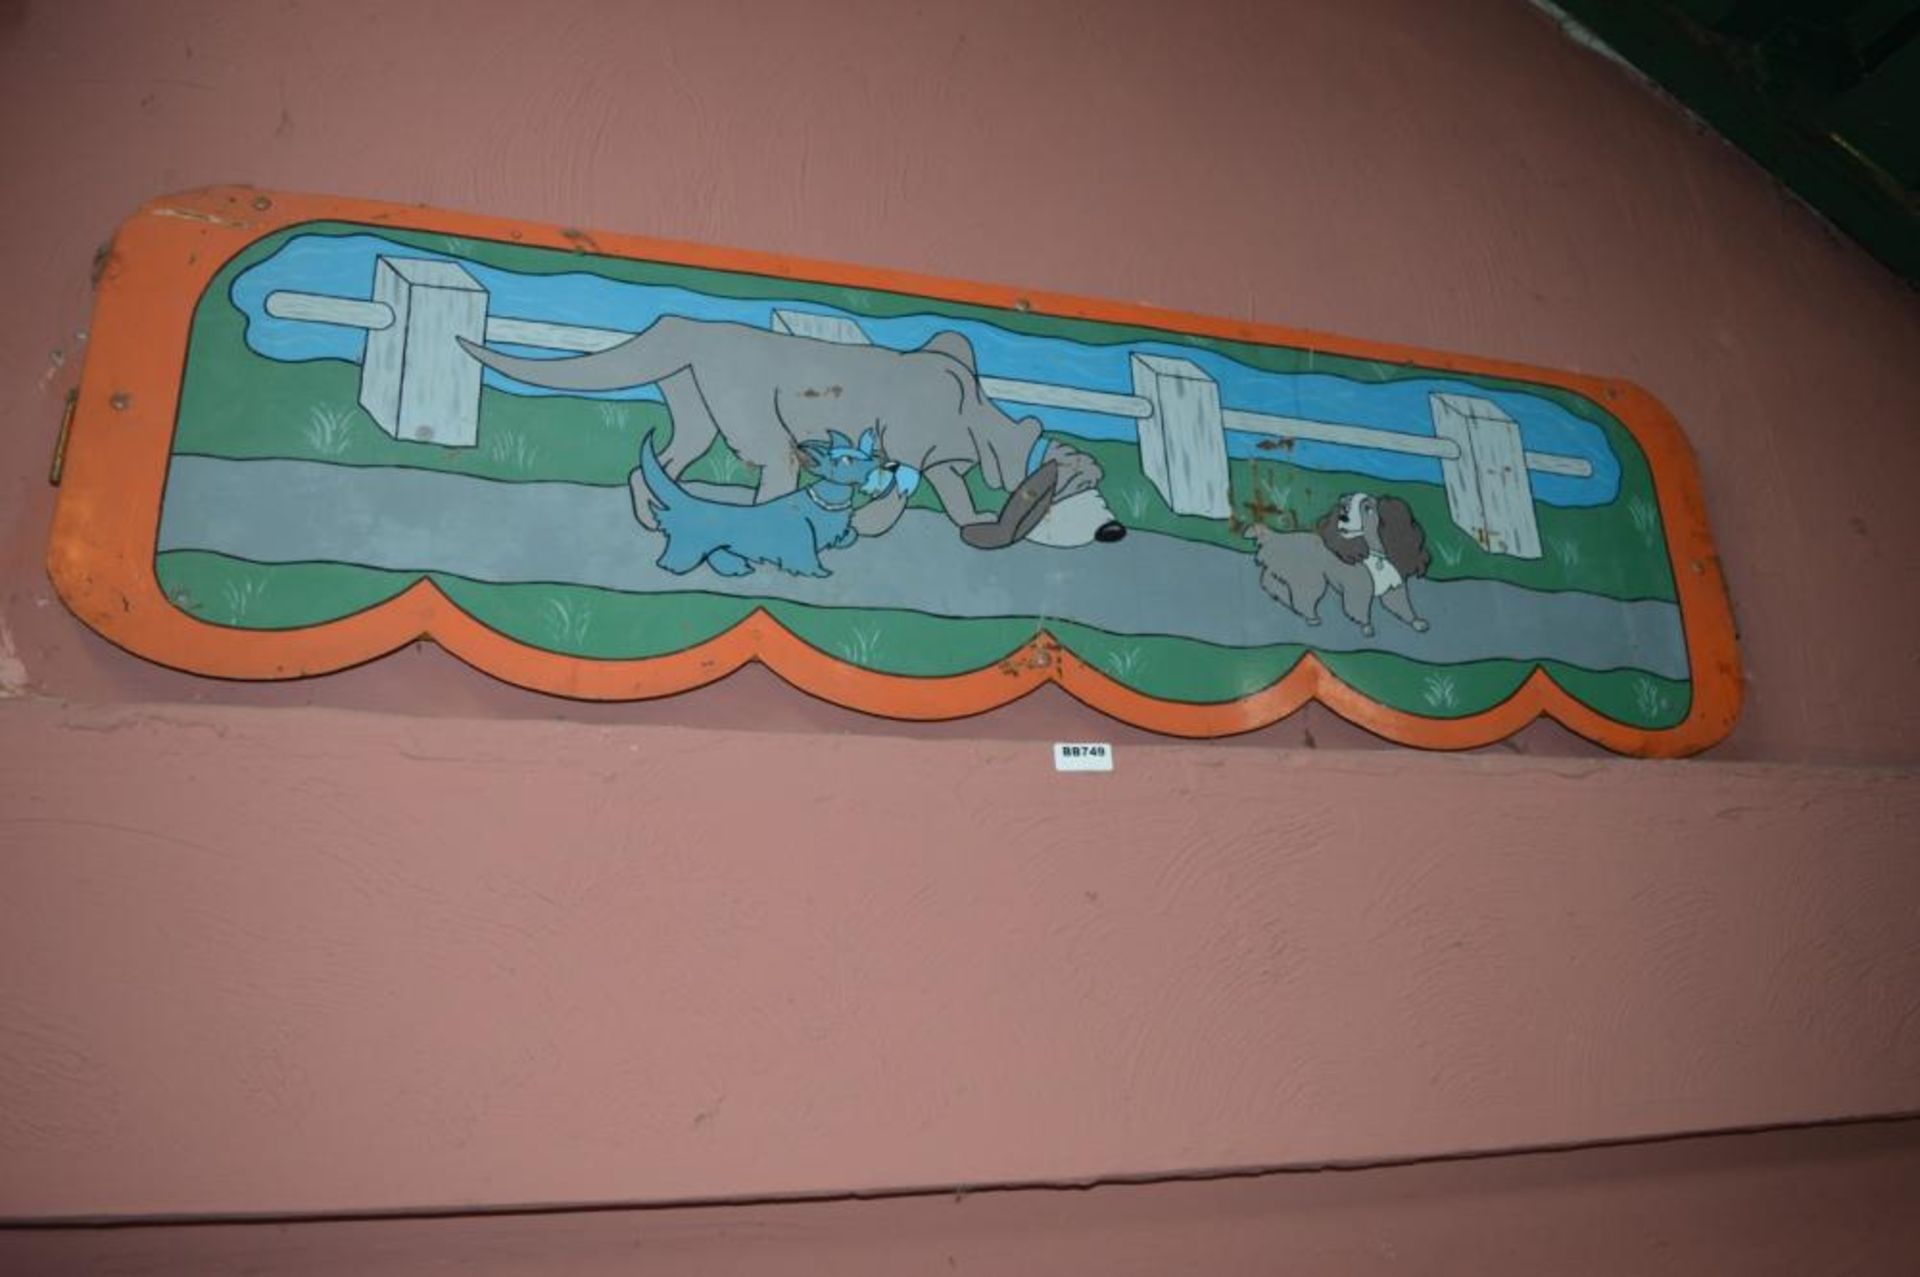 1 x Vintage Metal Hand Painted Fairground Ride Barrier Fence Panel With Braced Back and Mounting Hoo - Image 3 of 7